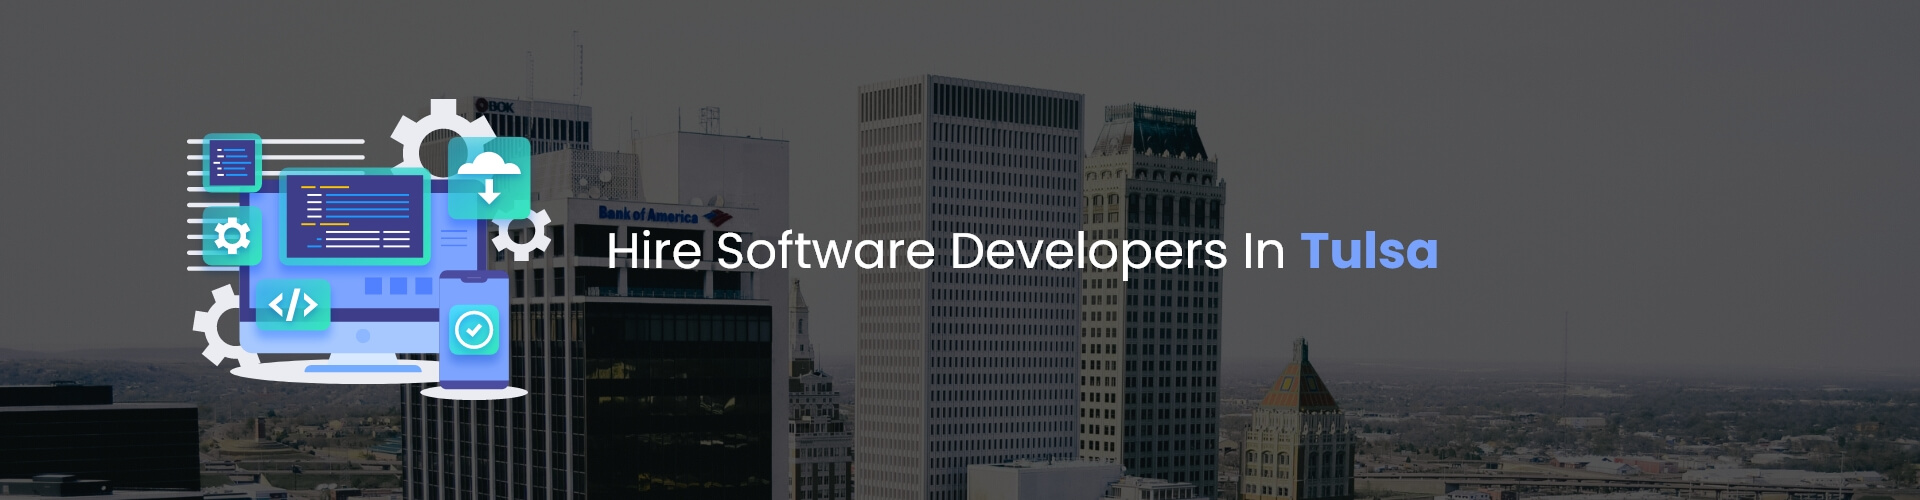 hire software developers in tulsa